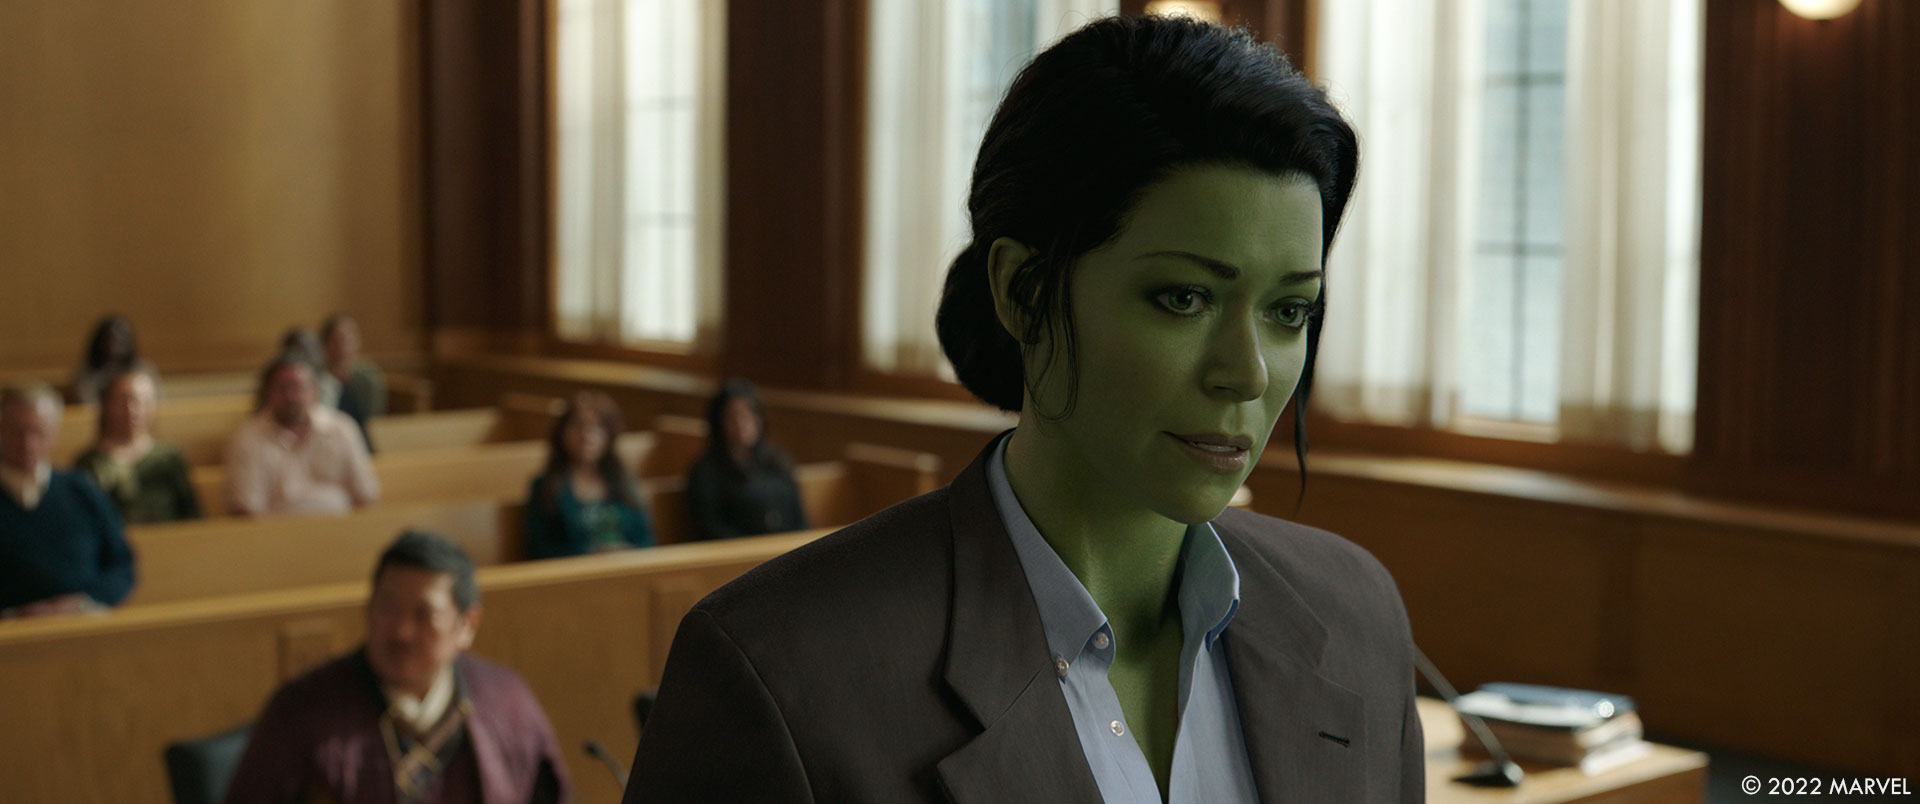 Ant-Man 3, She-Hulk VFX Problems Were Because of Pre-Production